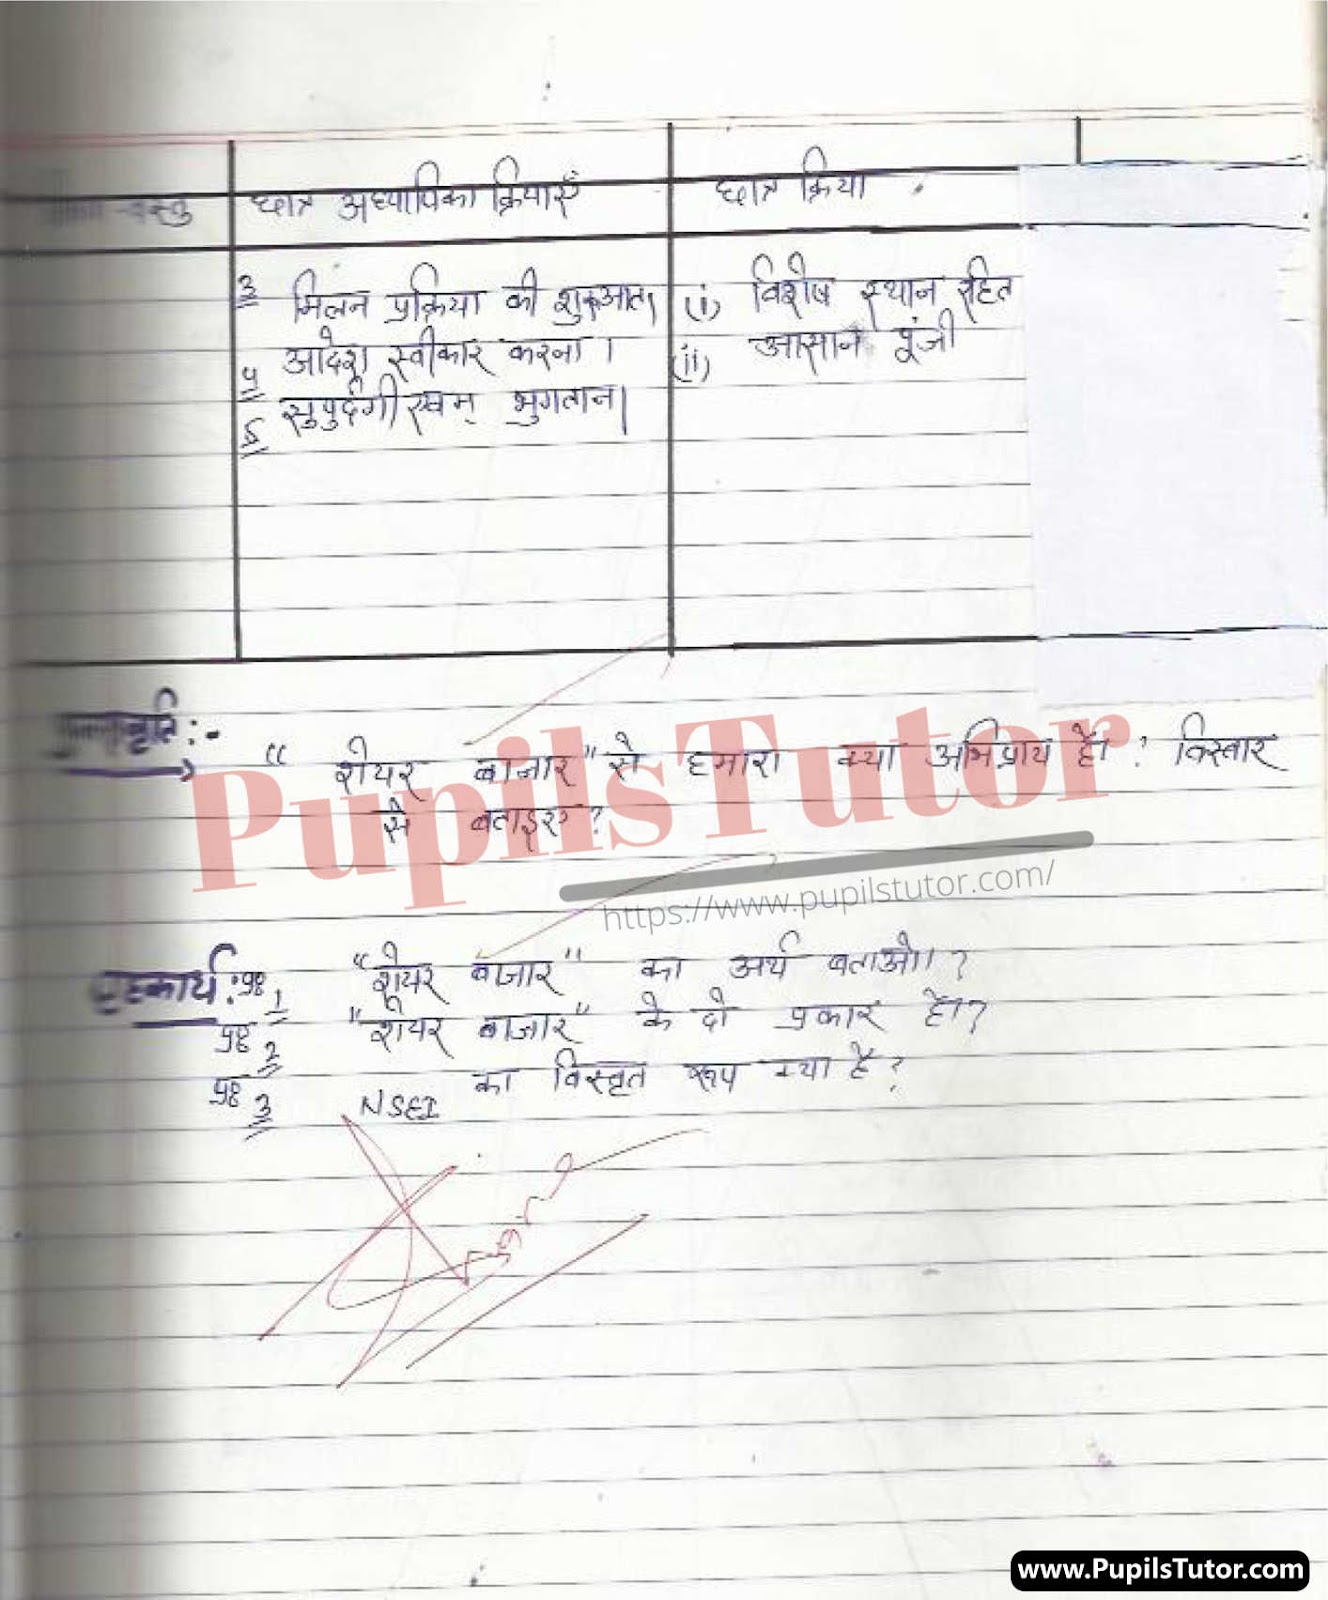 Lesson Plan On Share Bazar For Class 9, 10, 11, 12th | Share Bazar Path Yojna – [Page And Pic Number 5] – https://www.pupilstutor.com/